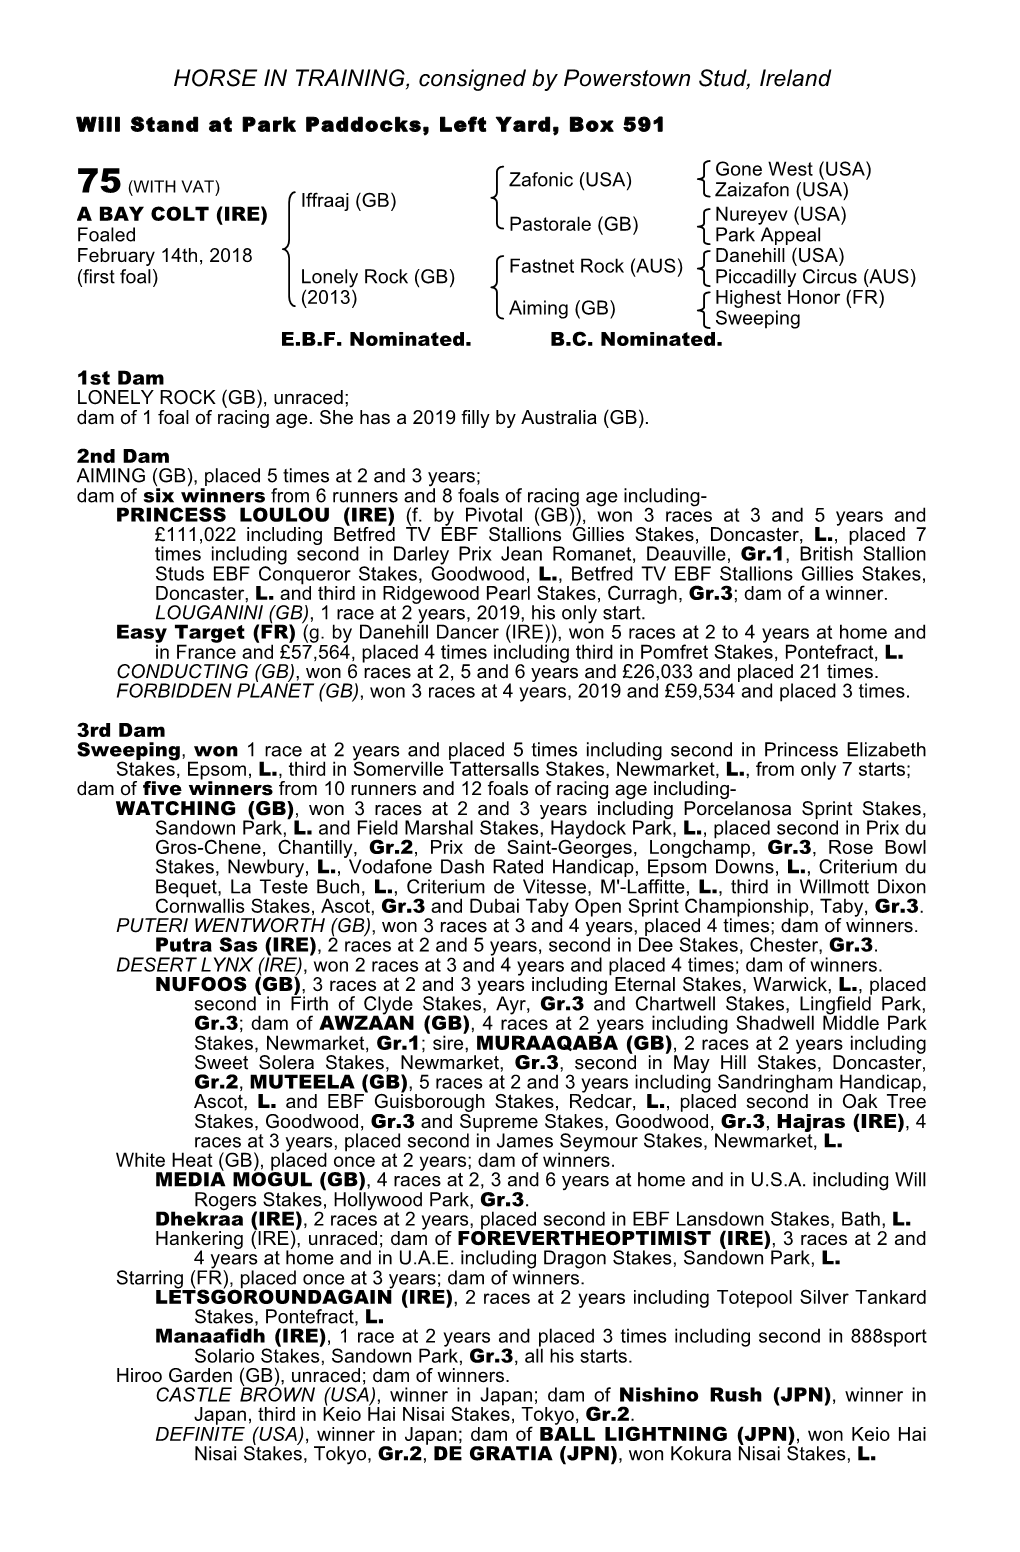 HORSE in TRAINING, Consigned by Powerstown Stud, Ireland